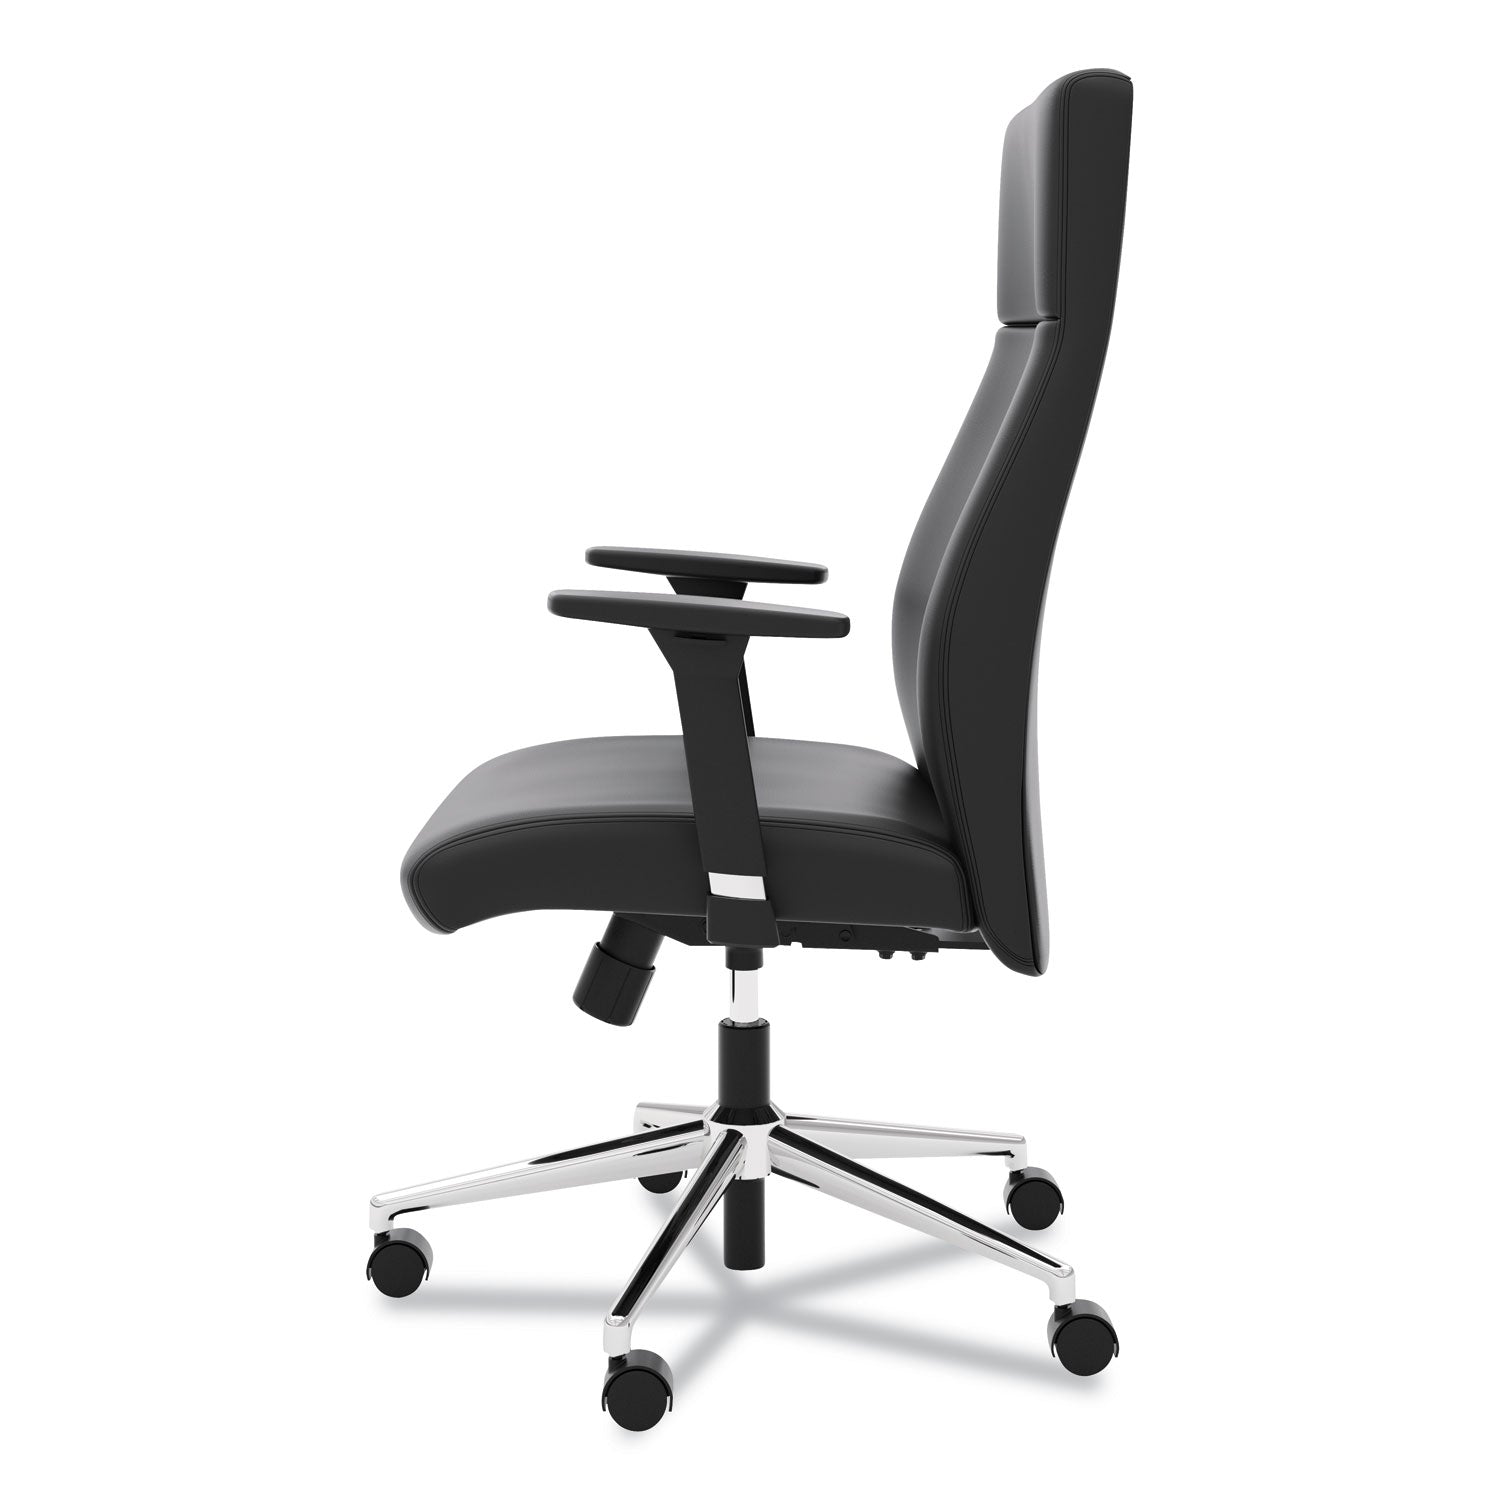 define-executive-high-back-leather-chair-supports-250-lb-17-to-21-seat-height-black-seat-back-polished-chrome-base_bsxvl108sb11 - 4